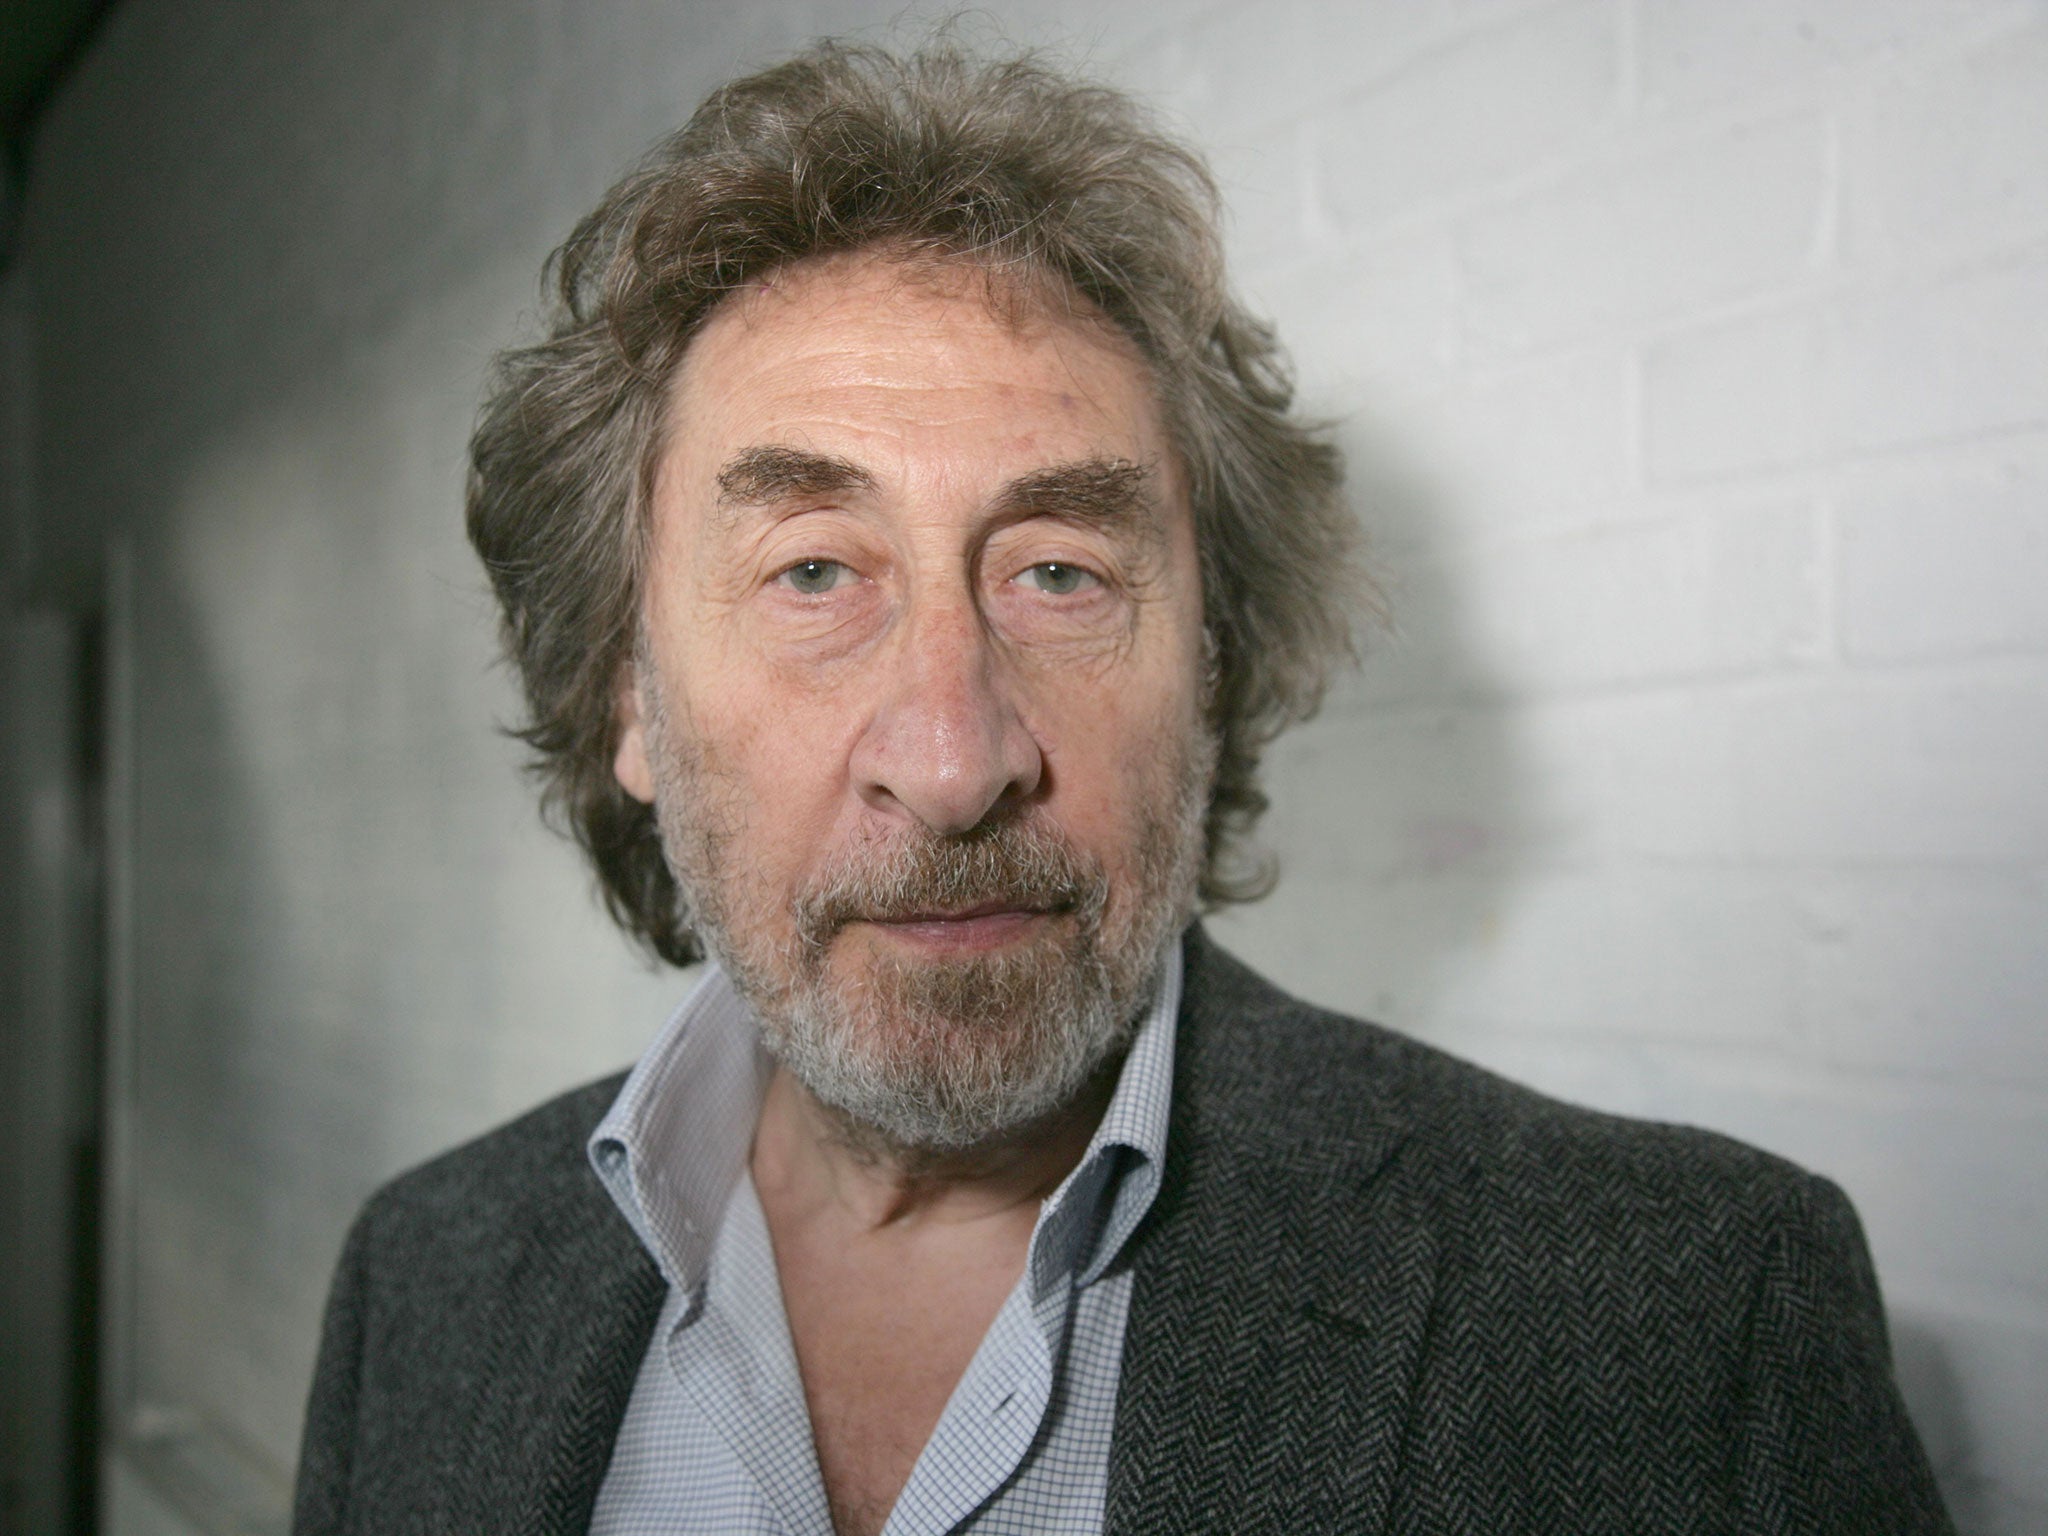 British author Howard Jacobson has been shortlisted for the Man Booker Prize